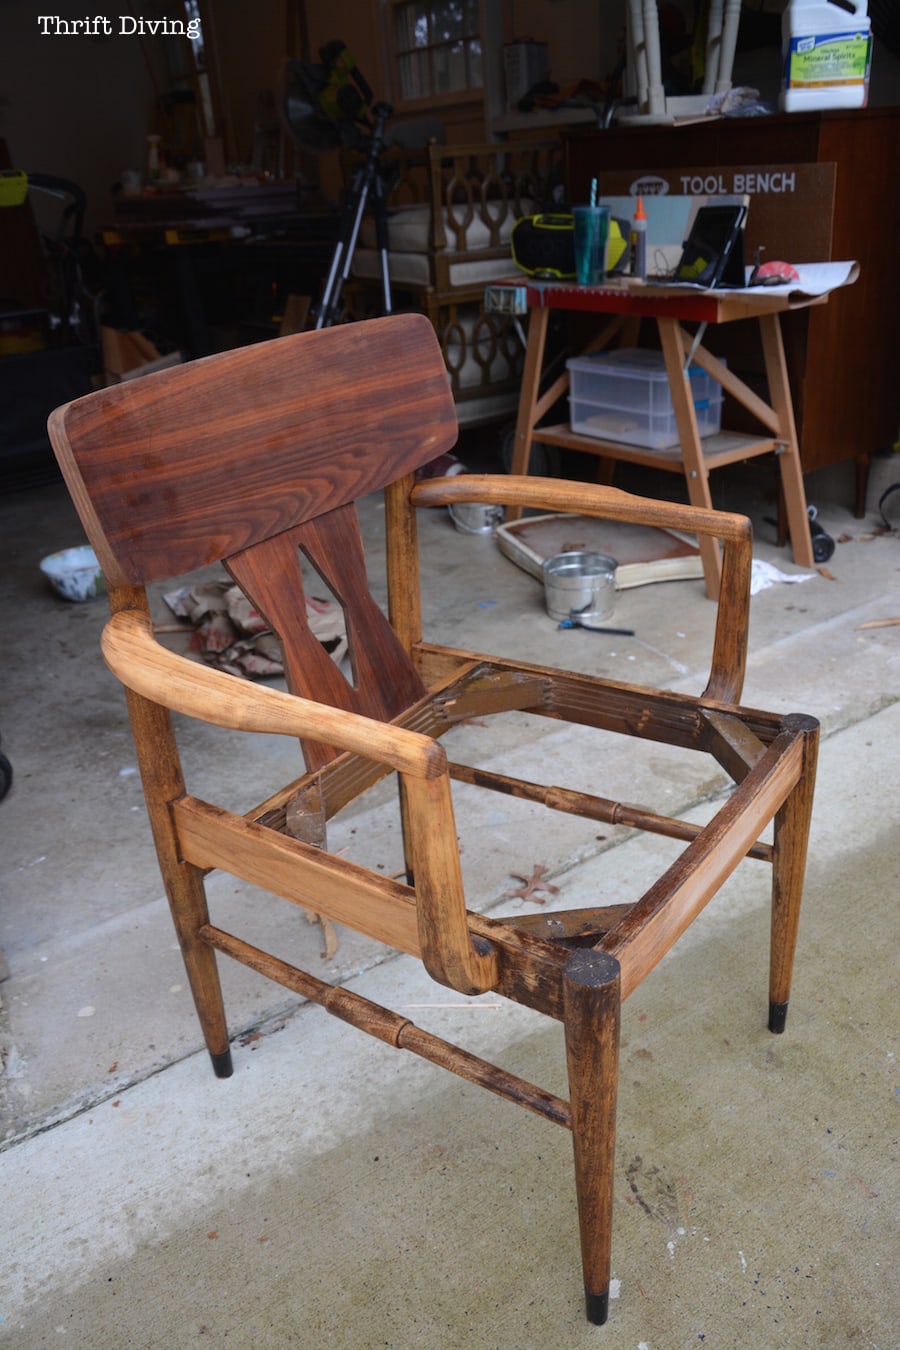 The Makeover of a Mid Century Modern Chair - PART 1 - ThriftDiving.com16